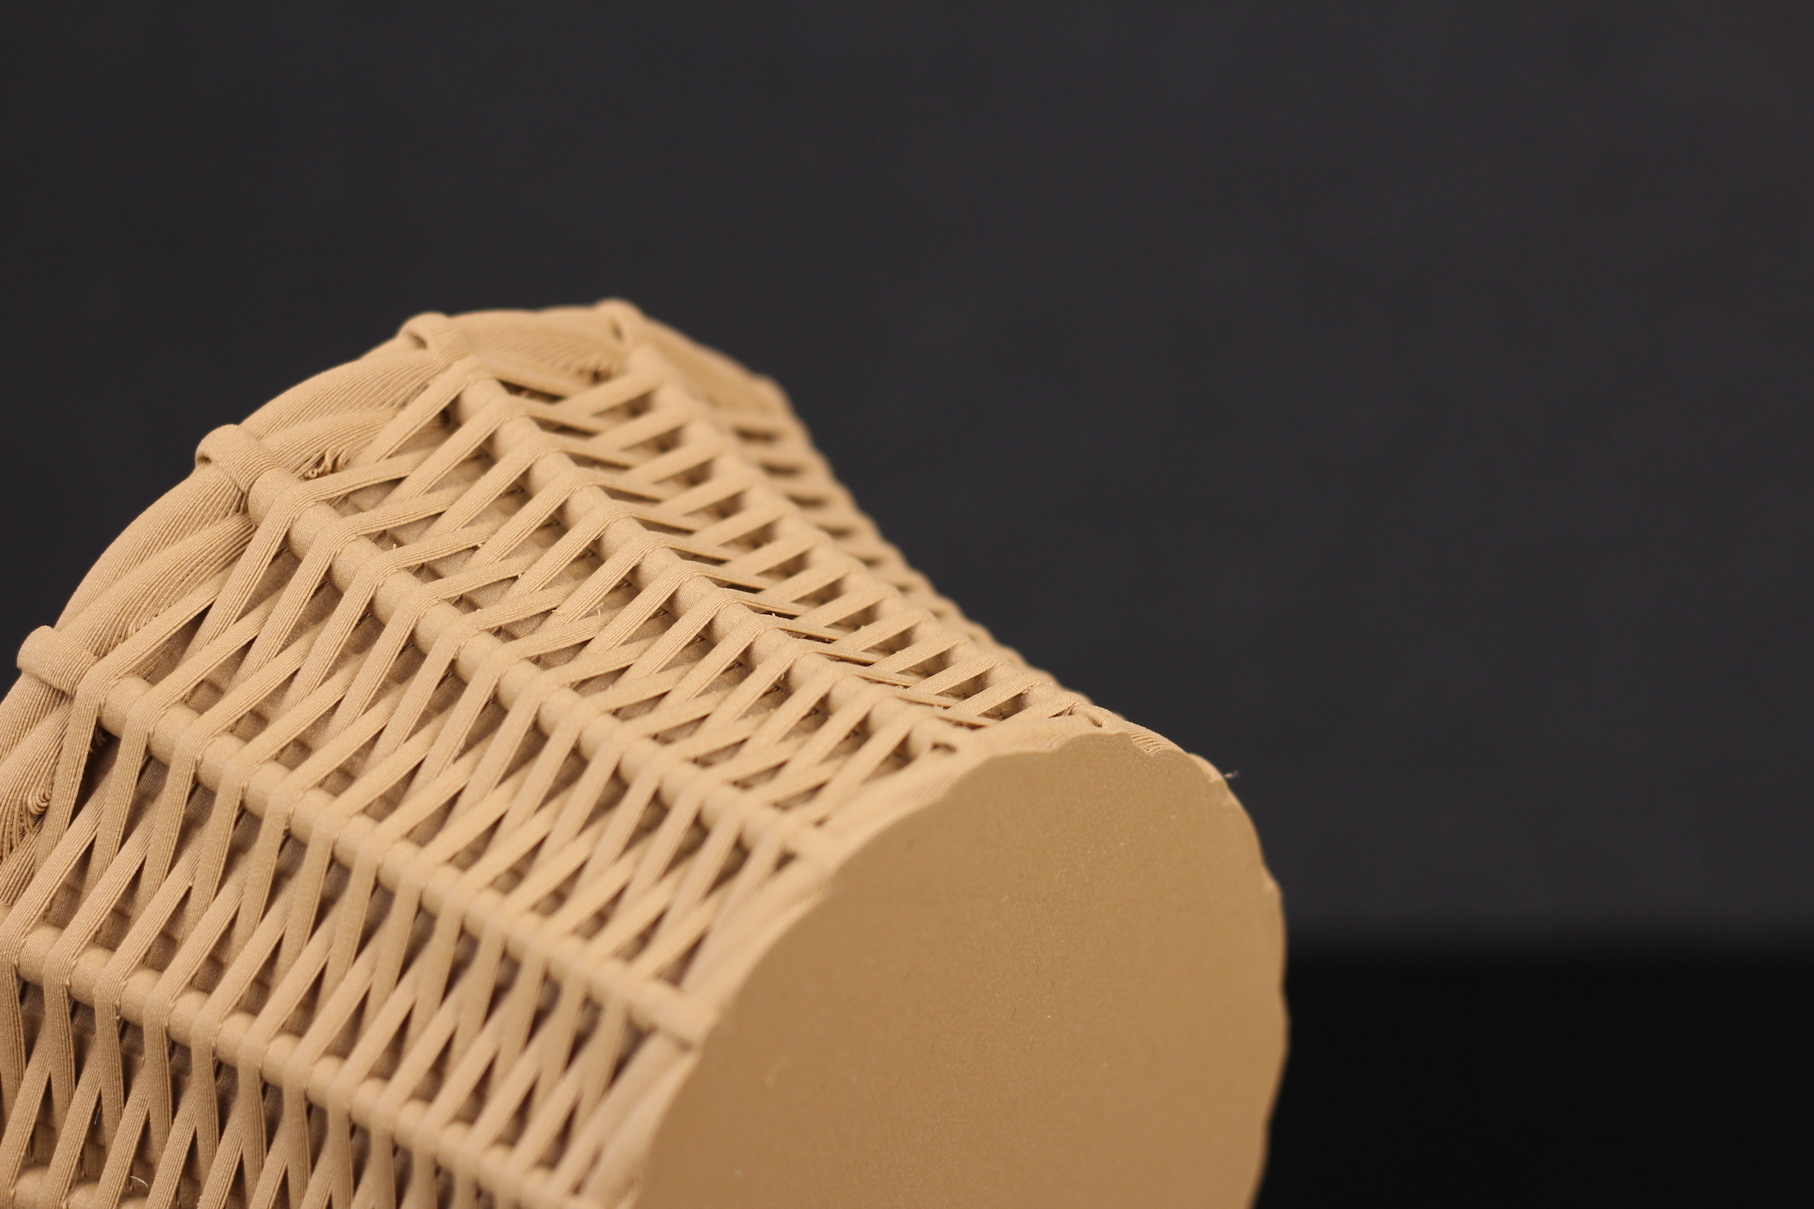 Rattan Basket printed on CR 10 Smart 1 | Creality CR-10 Smart Review: How smart it really is?